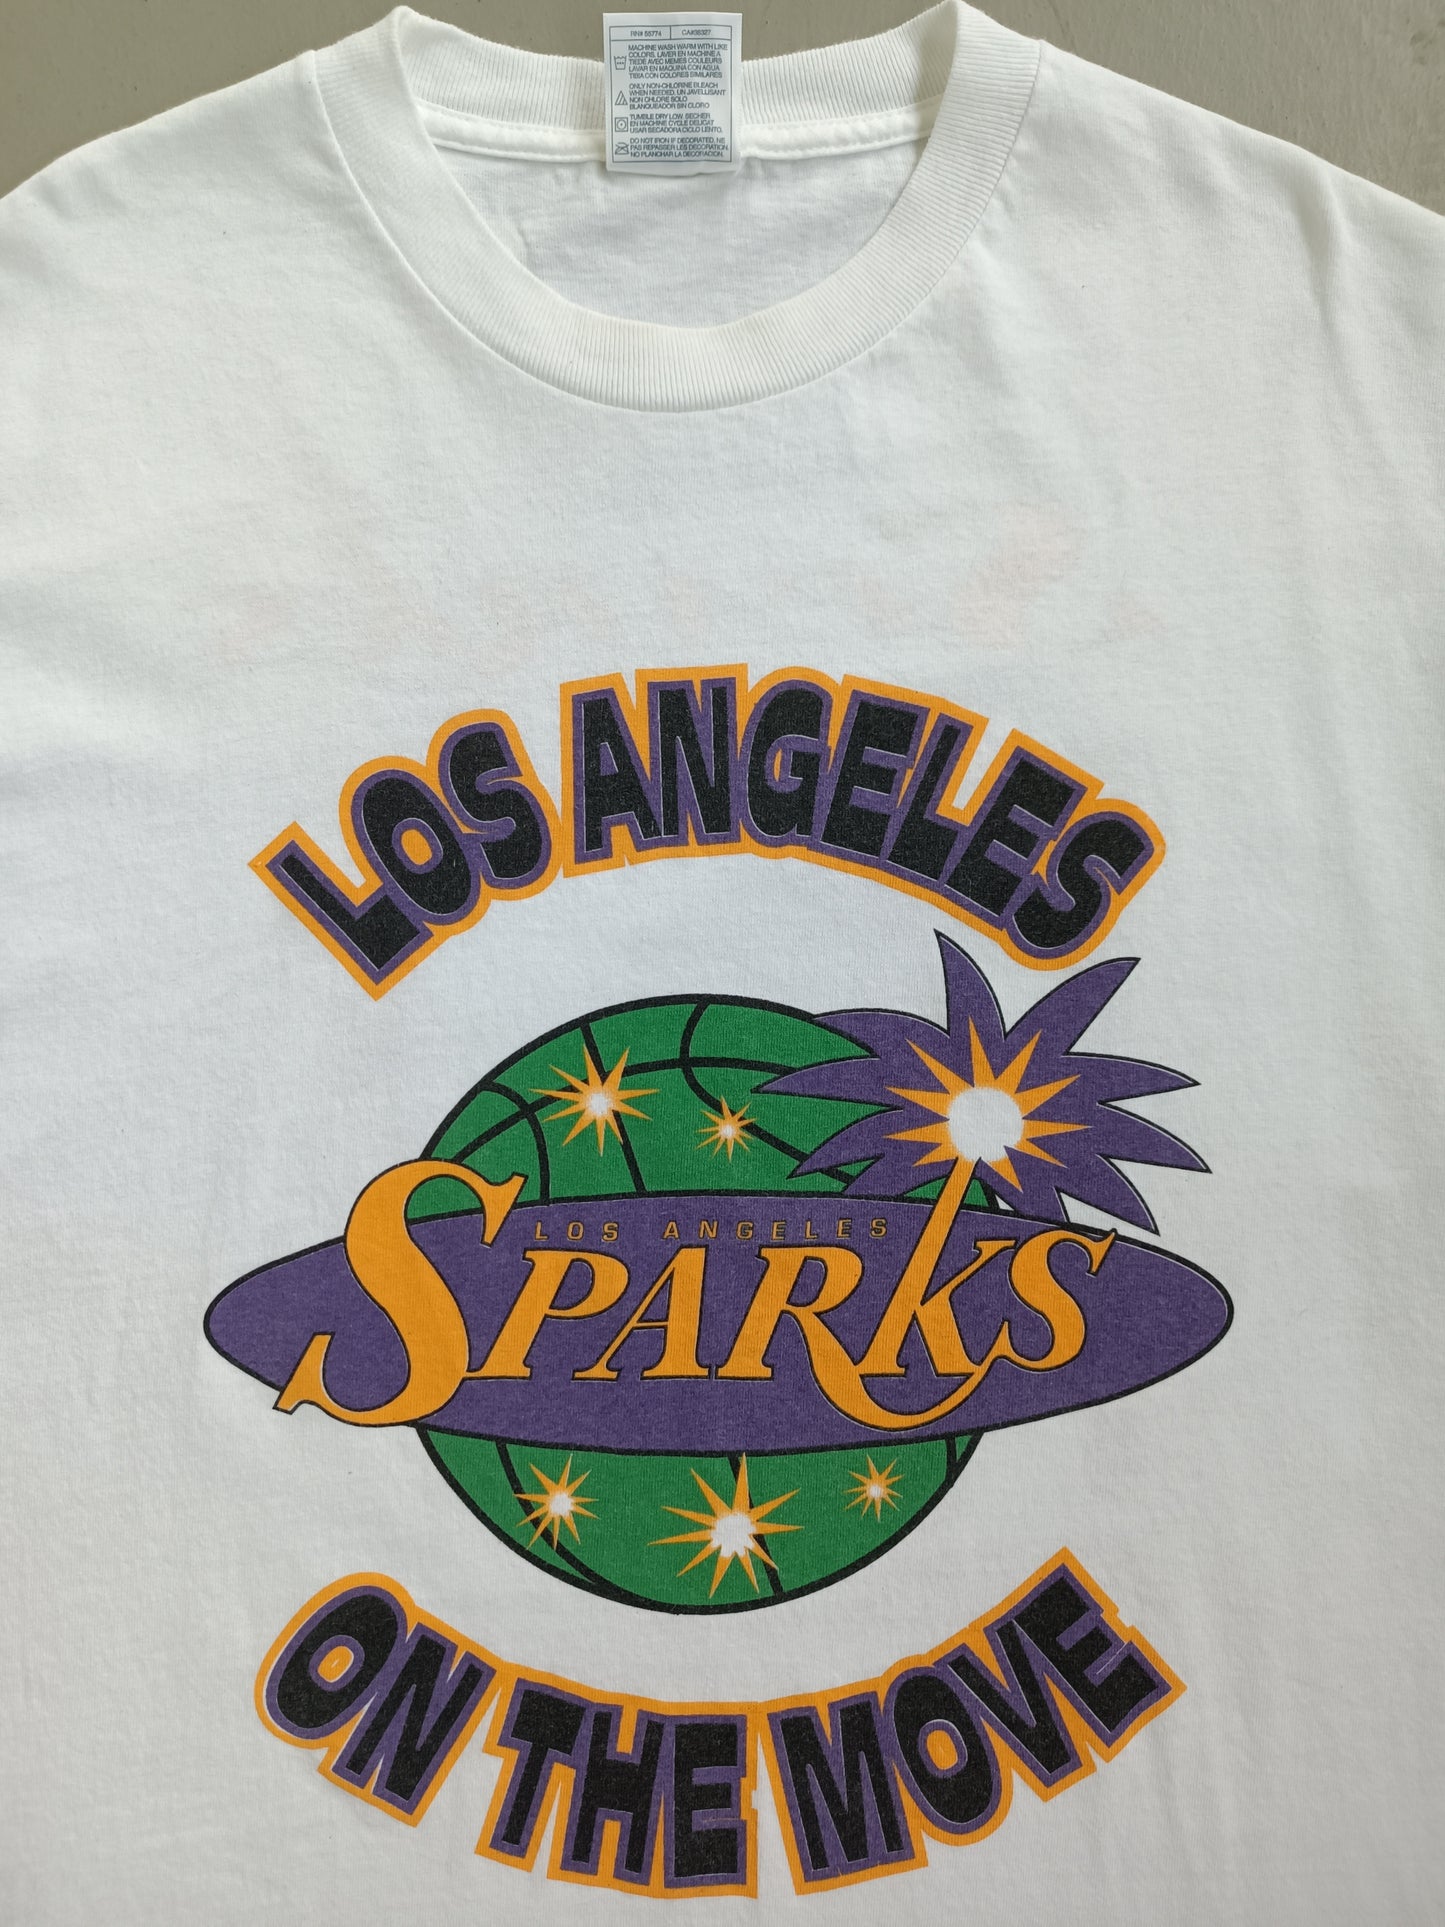 Los Angeles Sparks - XL